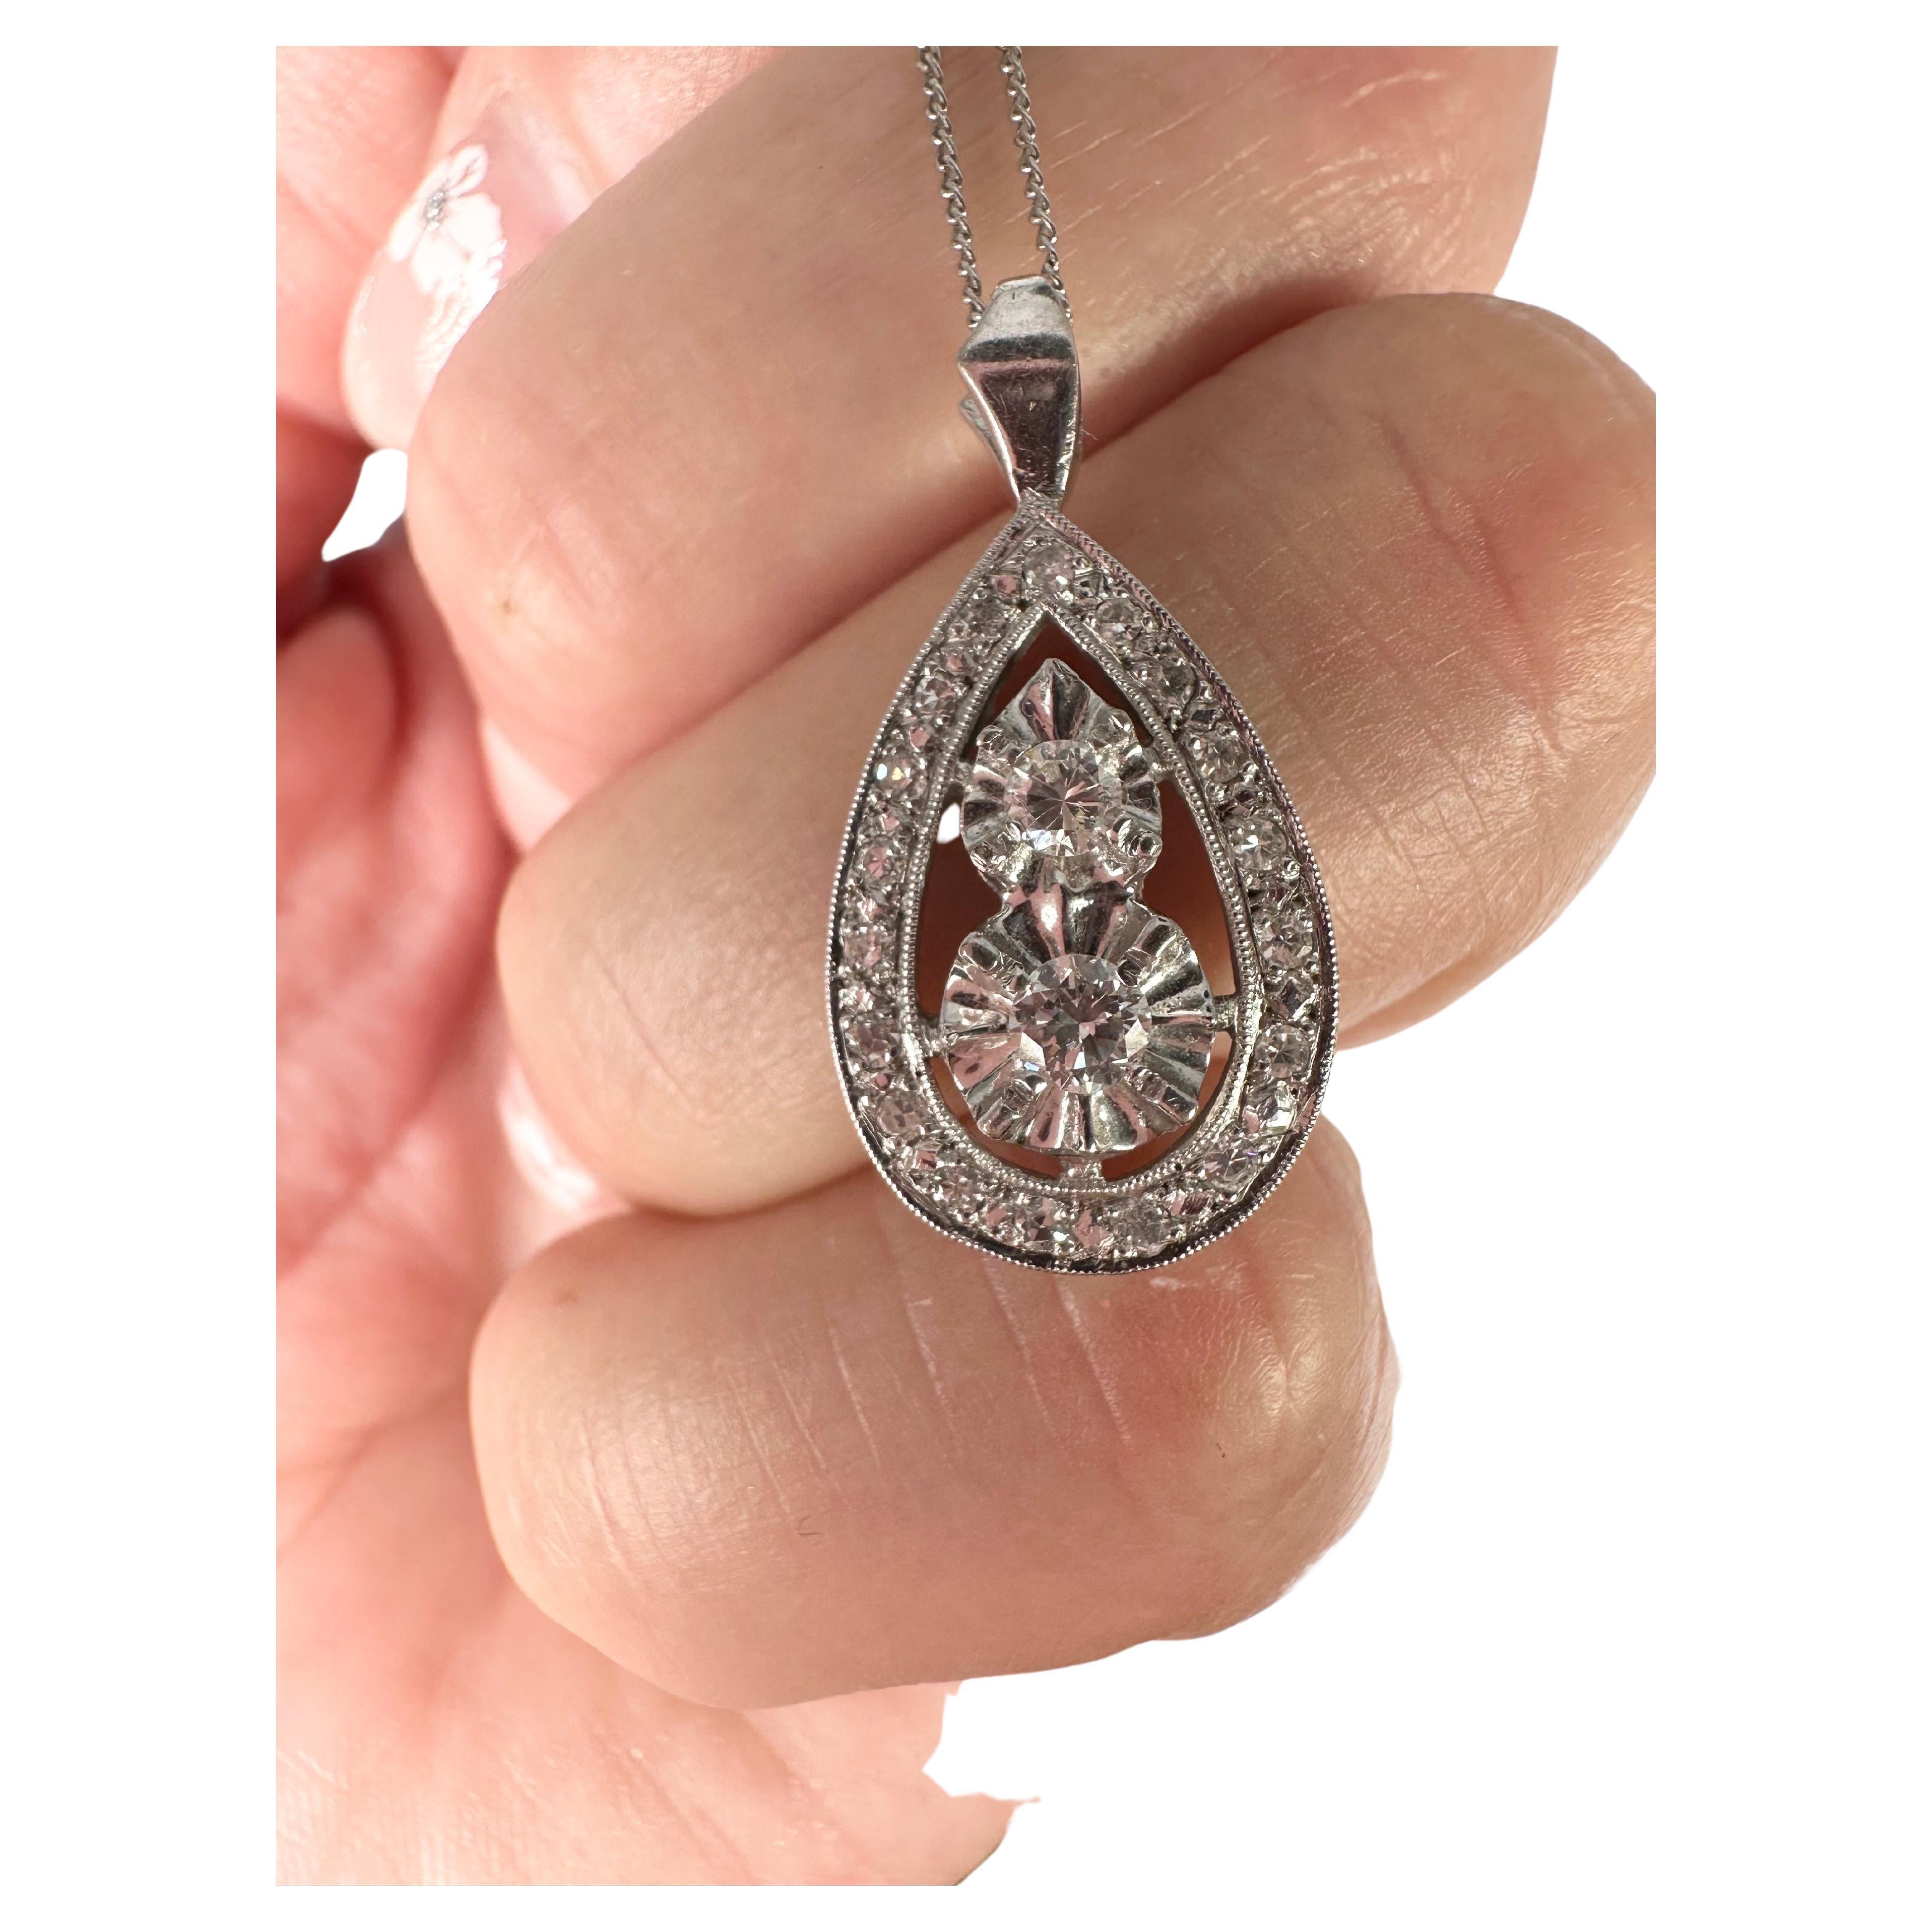 Beautiful vintage pendant necklace in 14KT white gold with natural single cut diamonds, 18 inches chain complements the pendant.

METAL: 14KT
NATURAL DIAMOND(S)
Clarity/Color: VS-SI/F-G
Cut: Round (singel cut)
Carat:0.47ct
Grams3.16
size: 18 inches